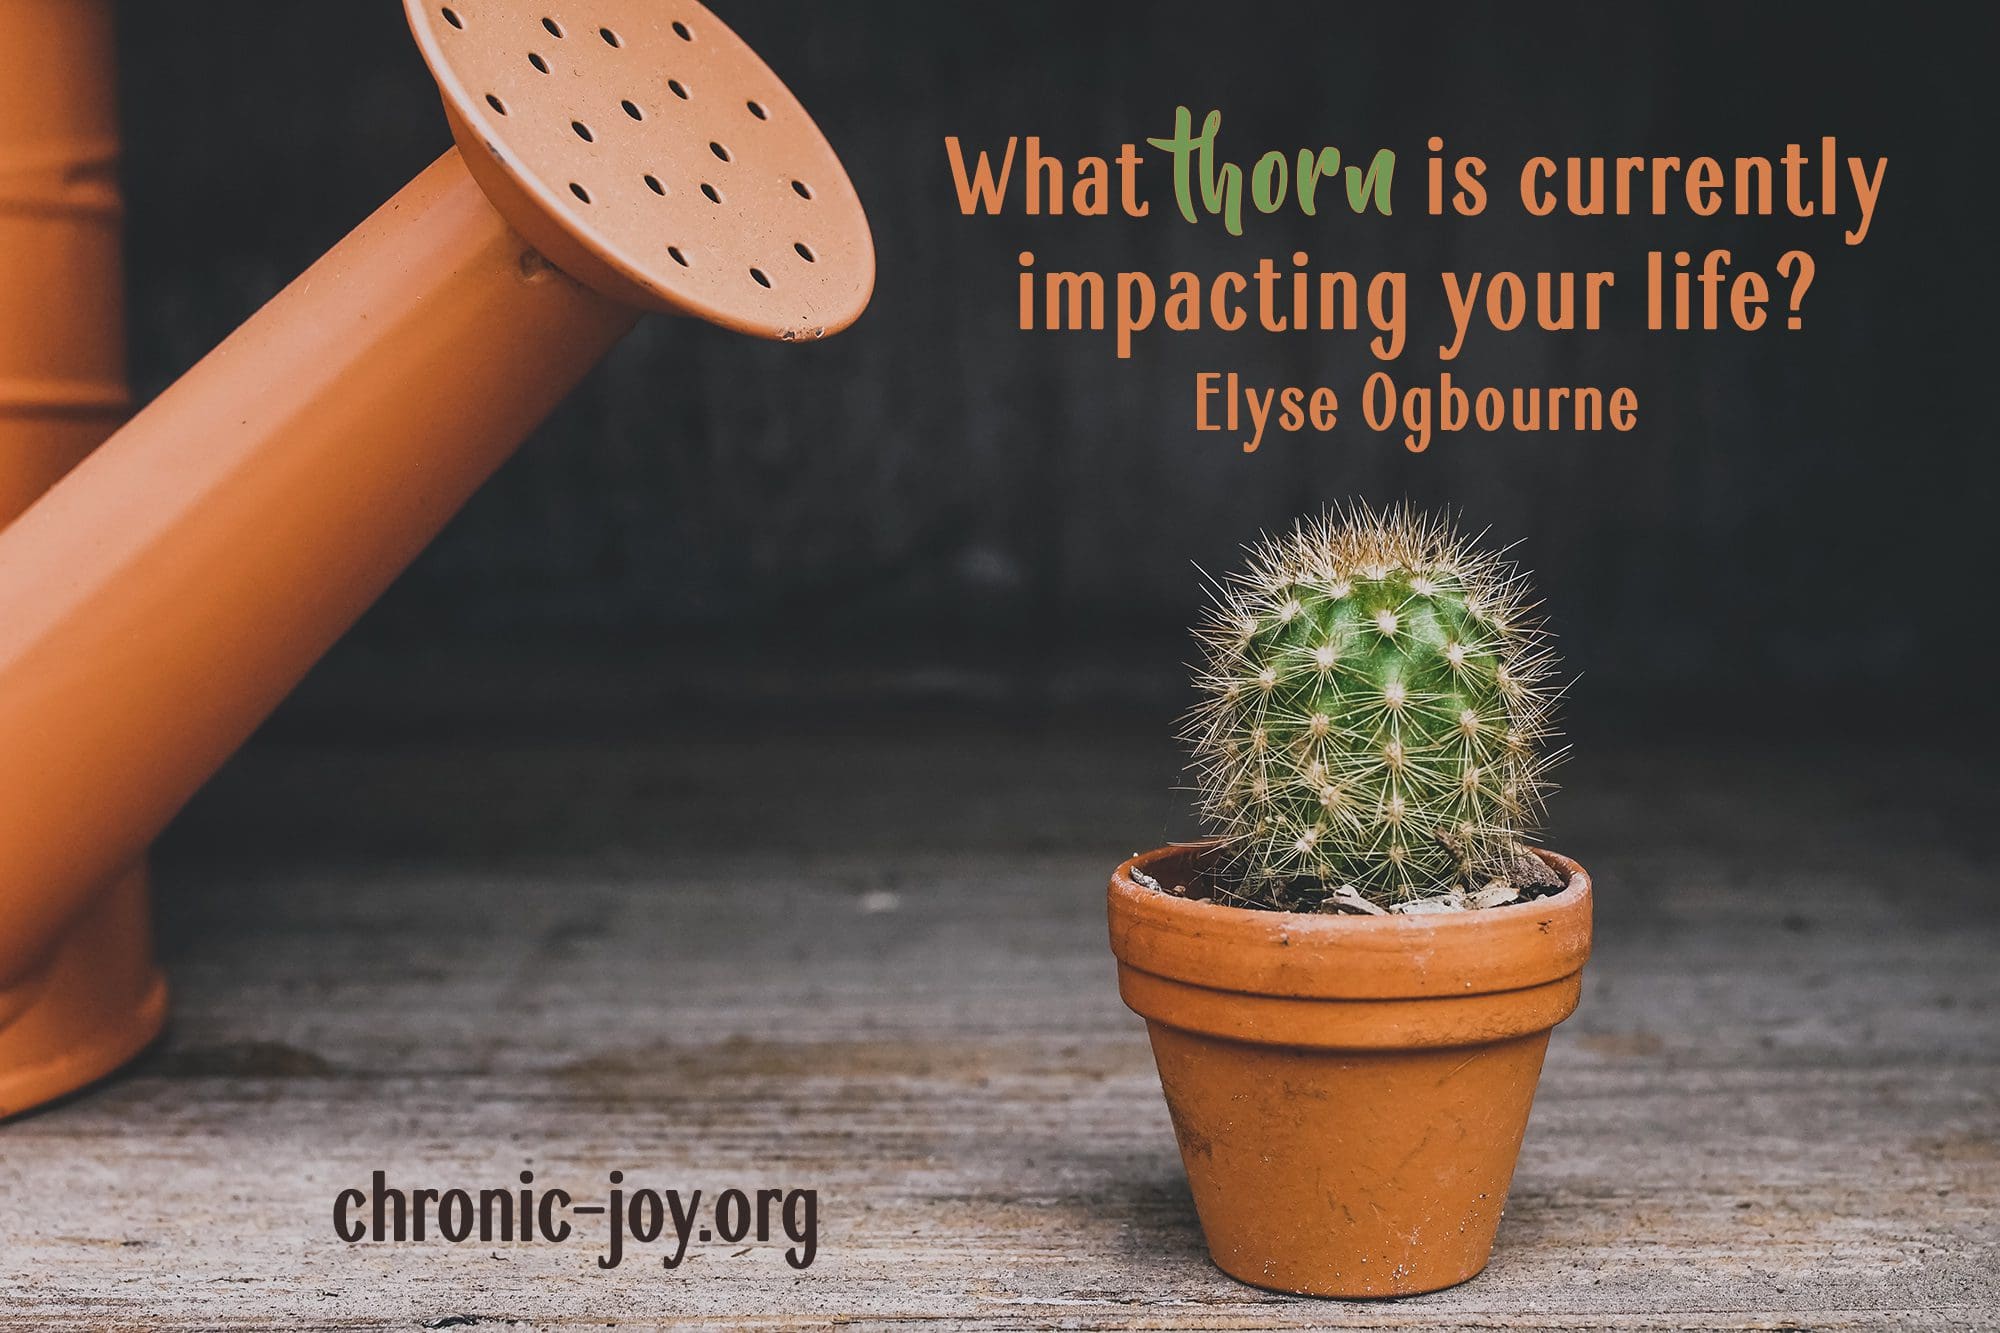 "What thorn is currently impacting your life?" Elyse Ogbourne